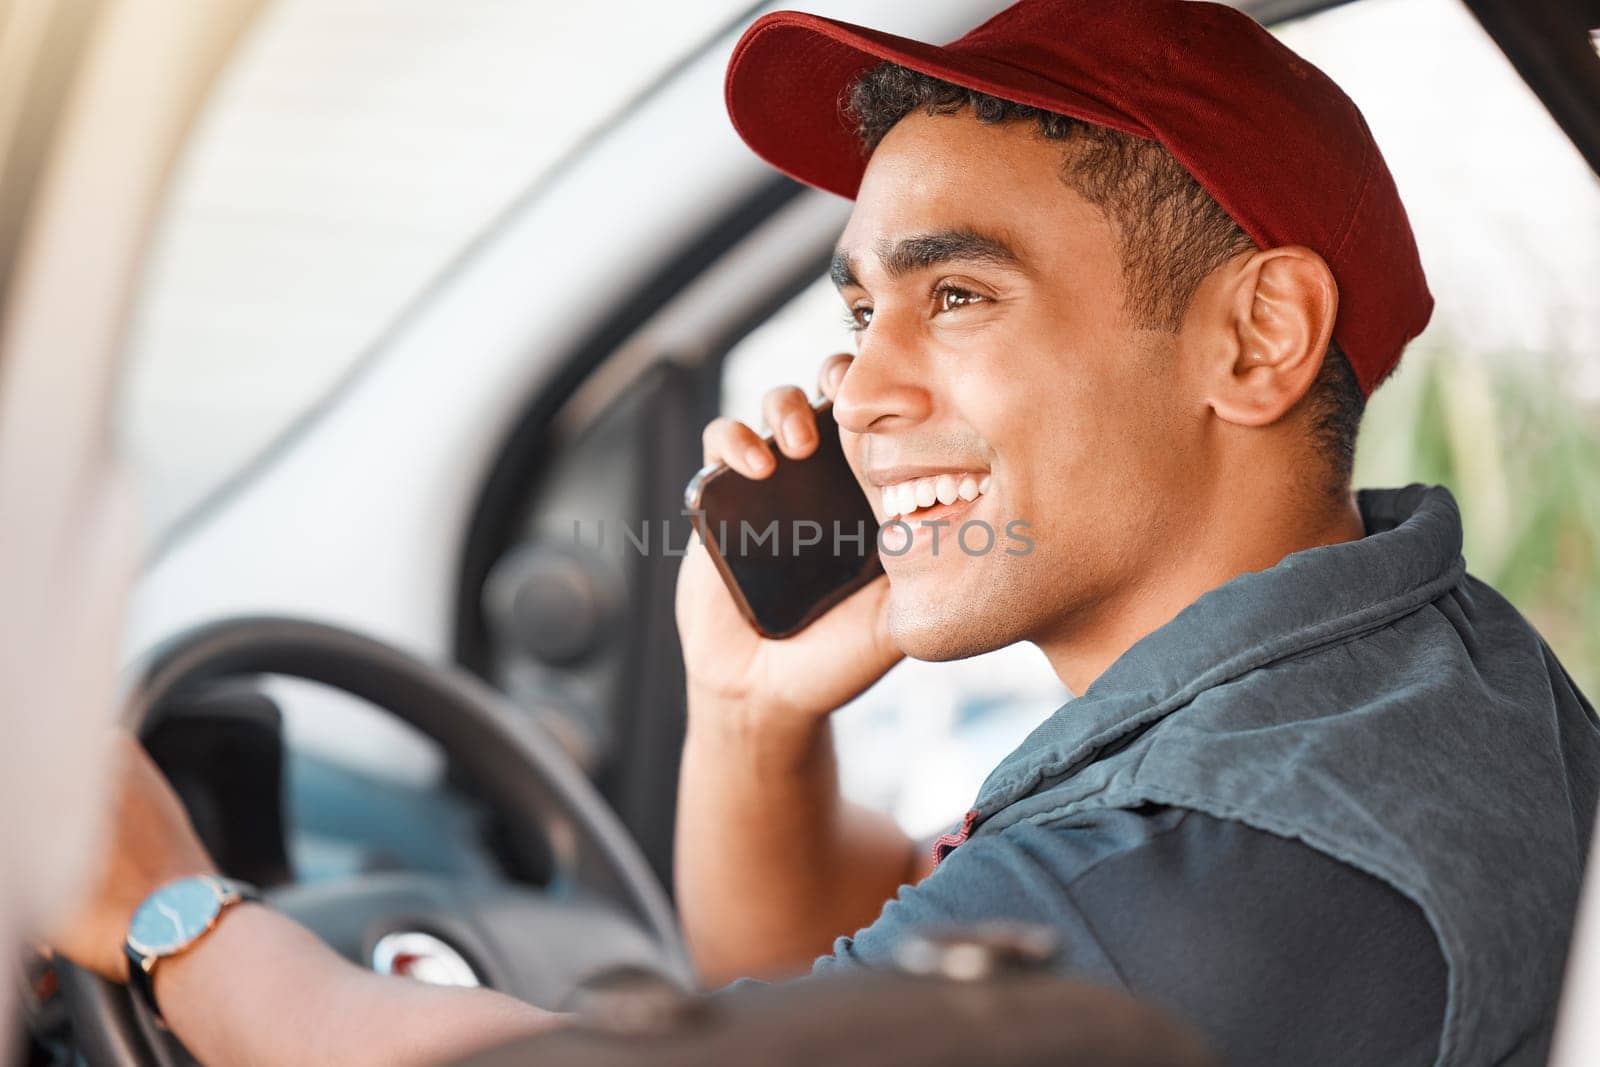 Phone call, driving and courier talking on a mobile while doing a delivery. Happy, young and driver working in logistics, ecommerce or transportation industry speaking on a smartphone in a car.